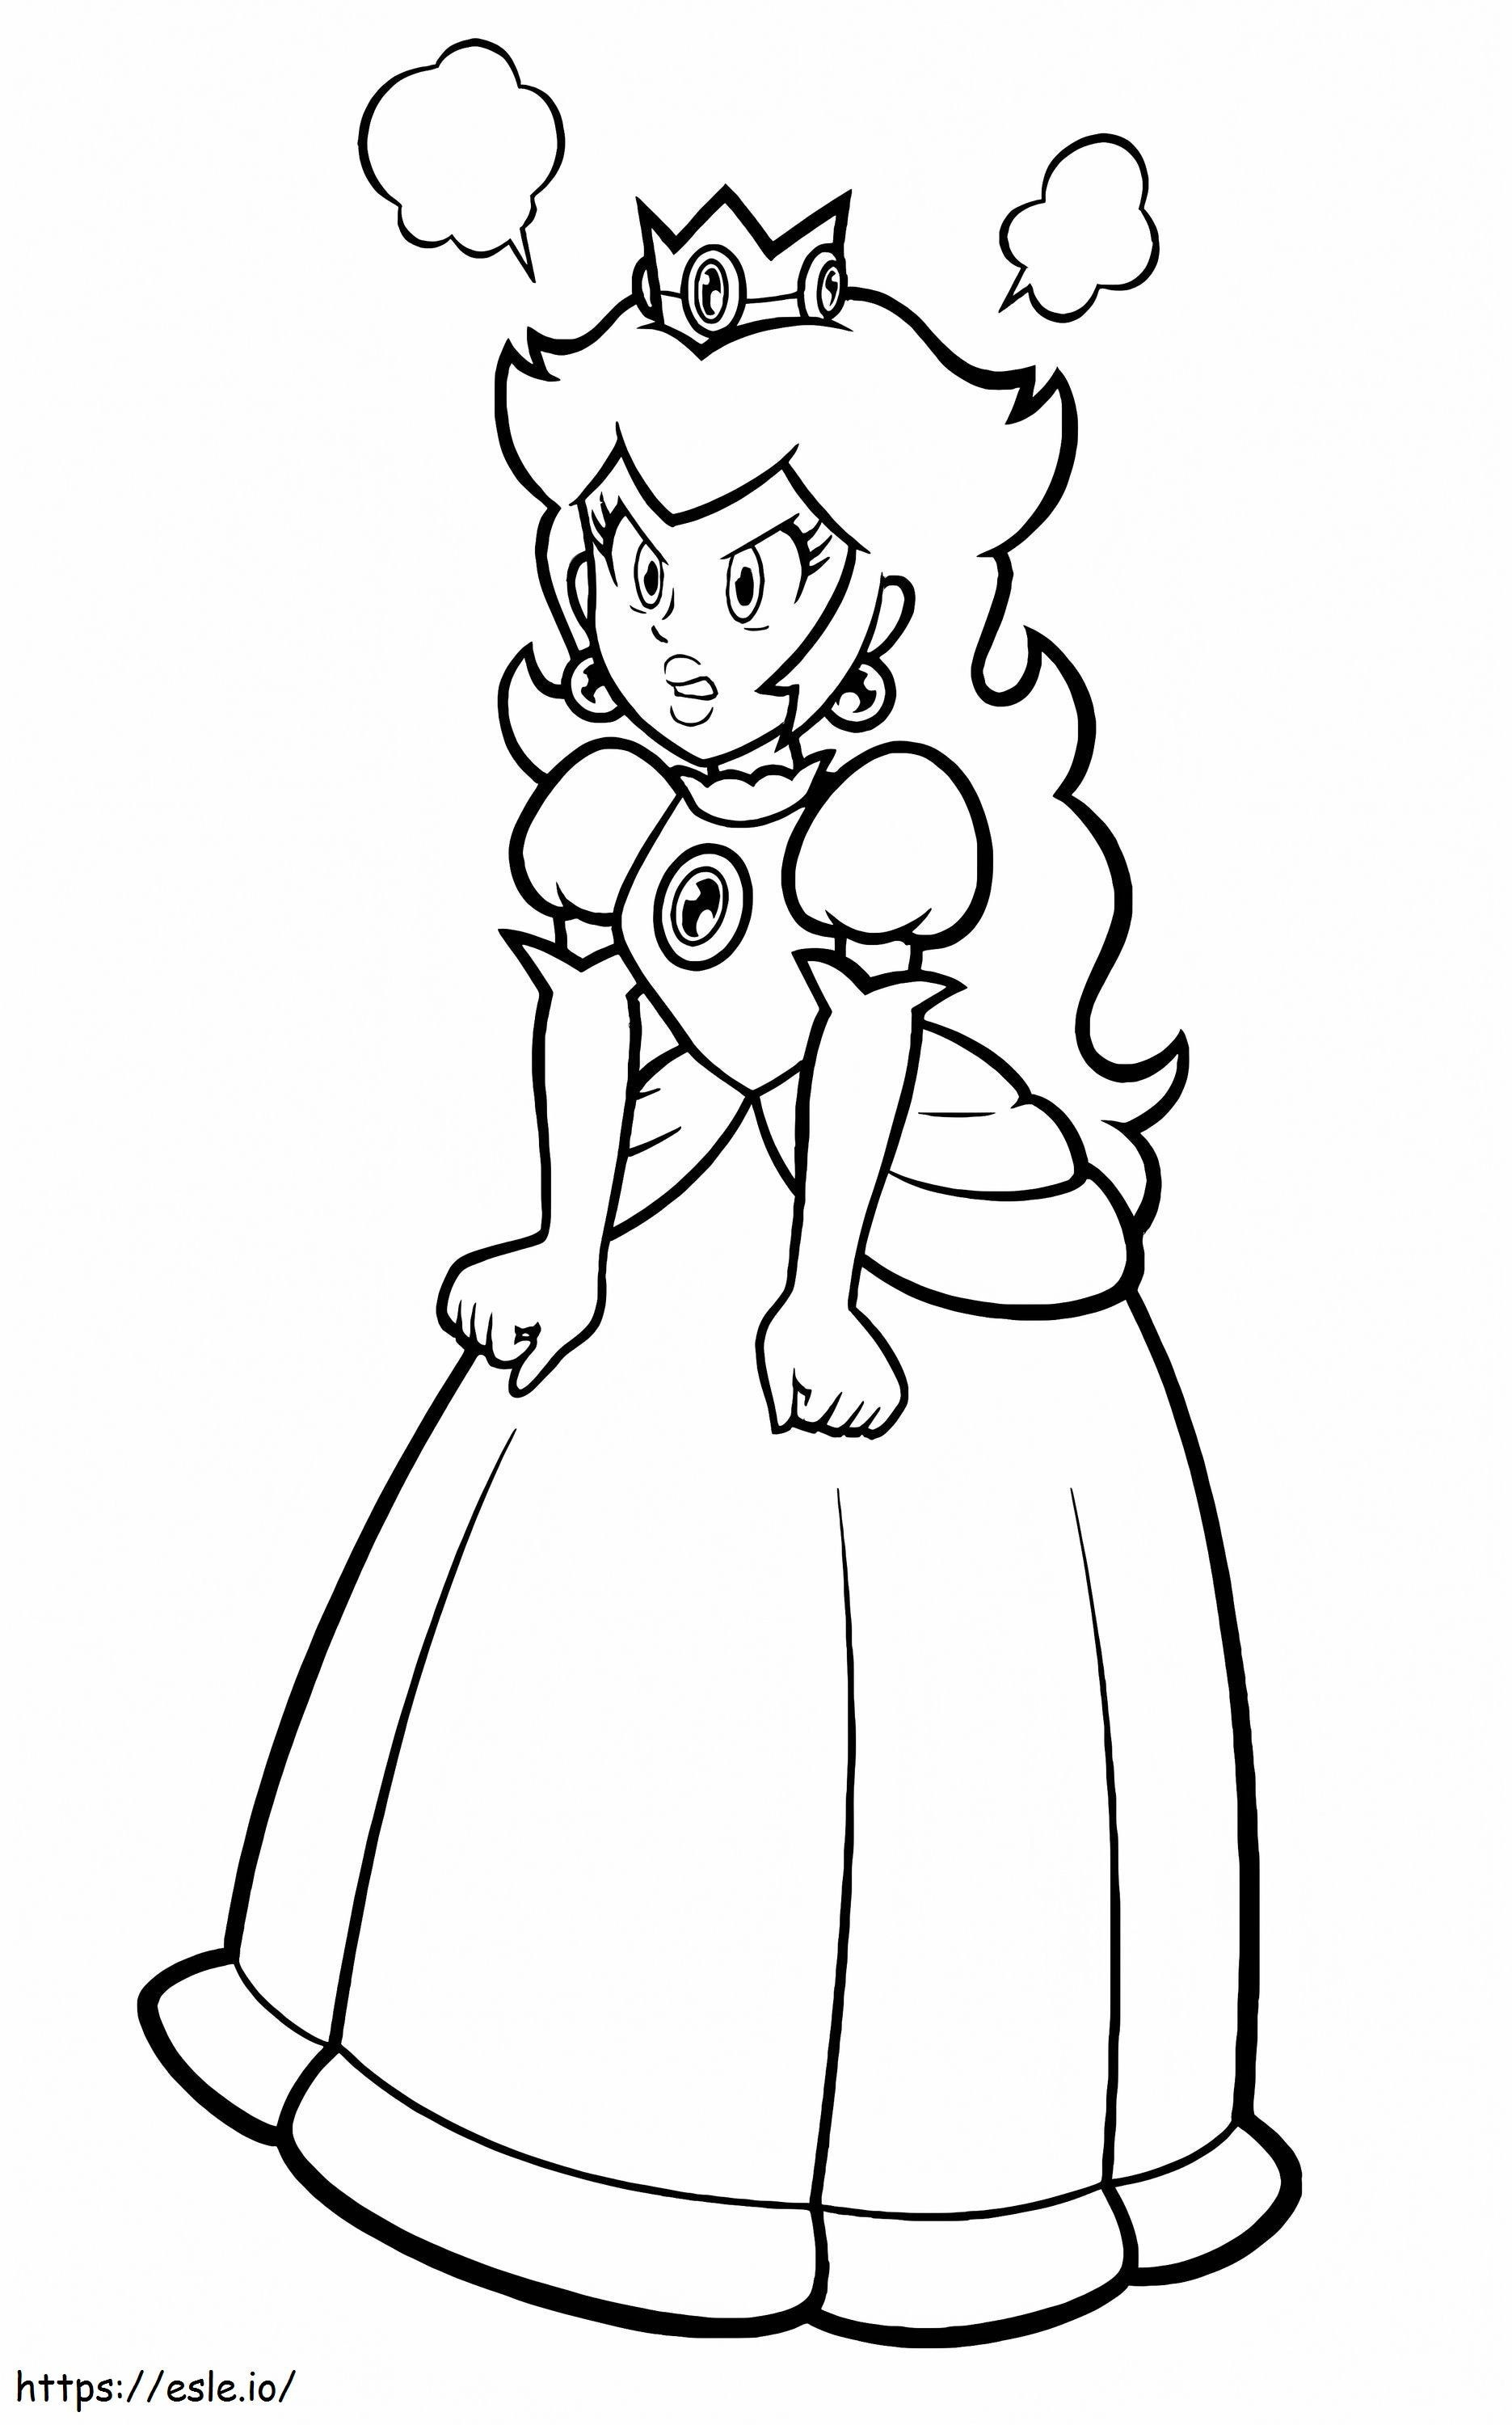 Angry Princess Peach coloring page